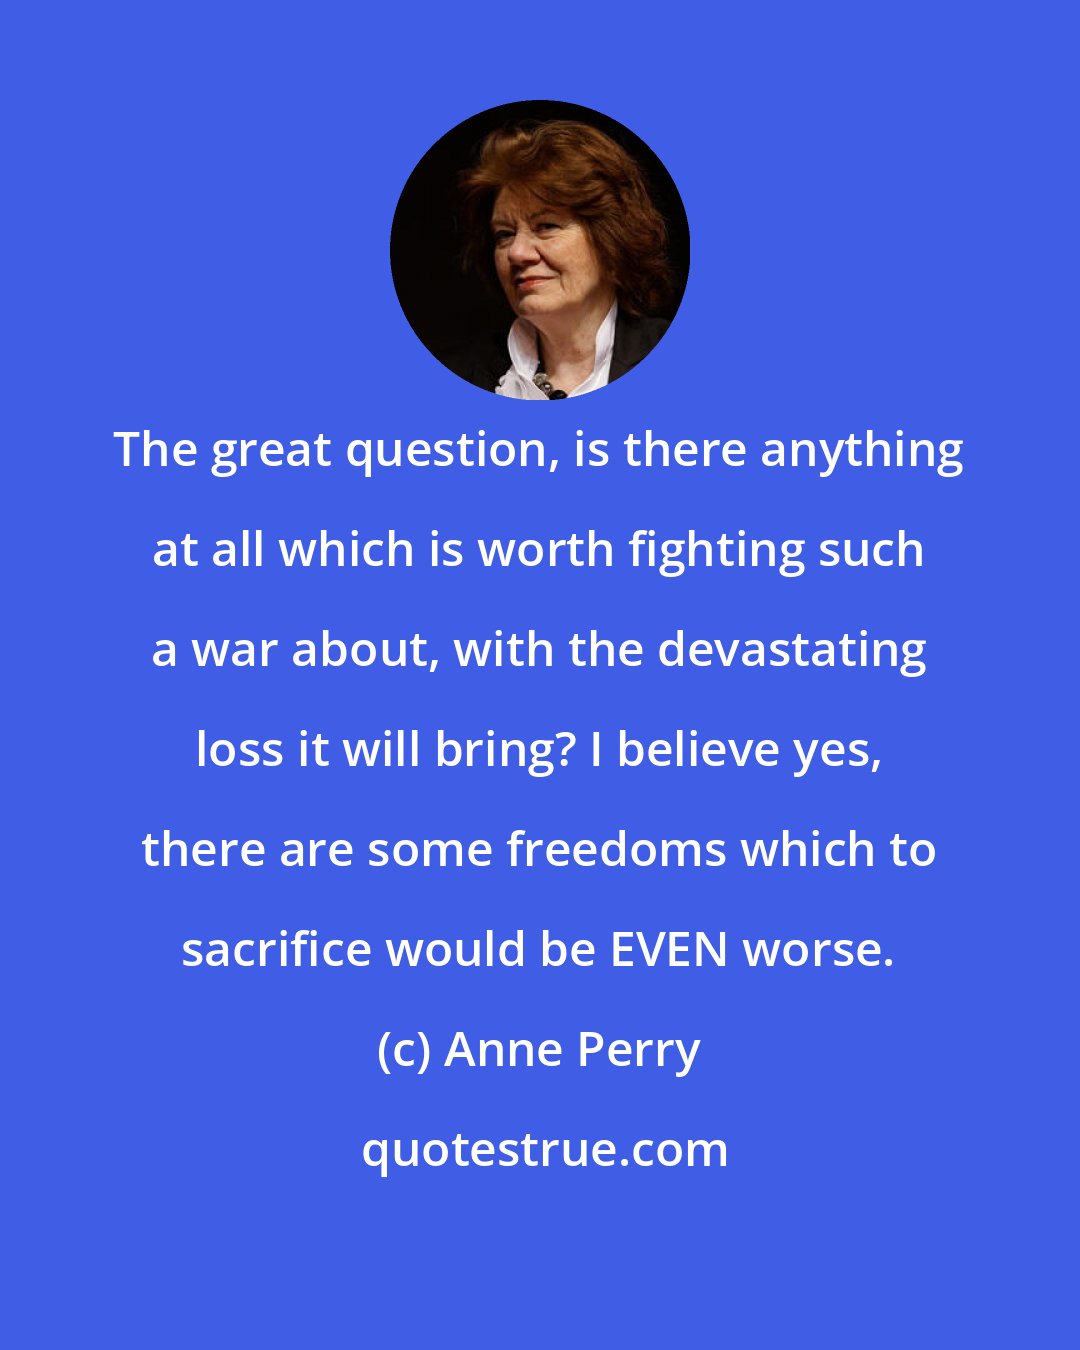 Anne Perry: The great question, is there anything at all which is worth fighting such a war about, with the devastating loss it will bring? I believe yes, there are some freedoms which to sacrifice would be EVEN worse.